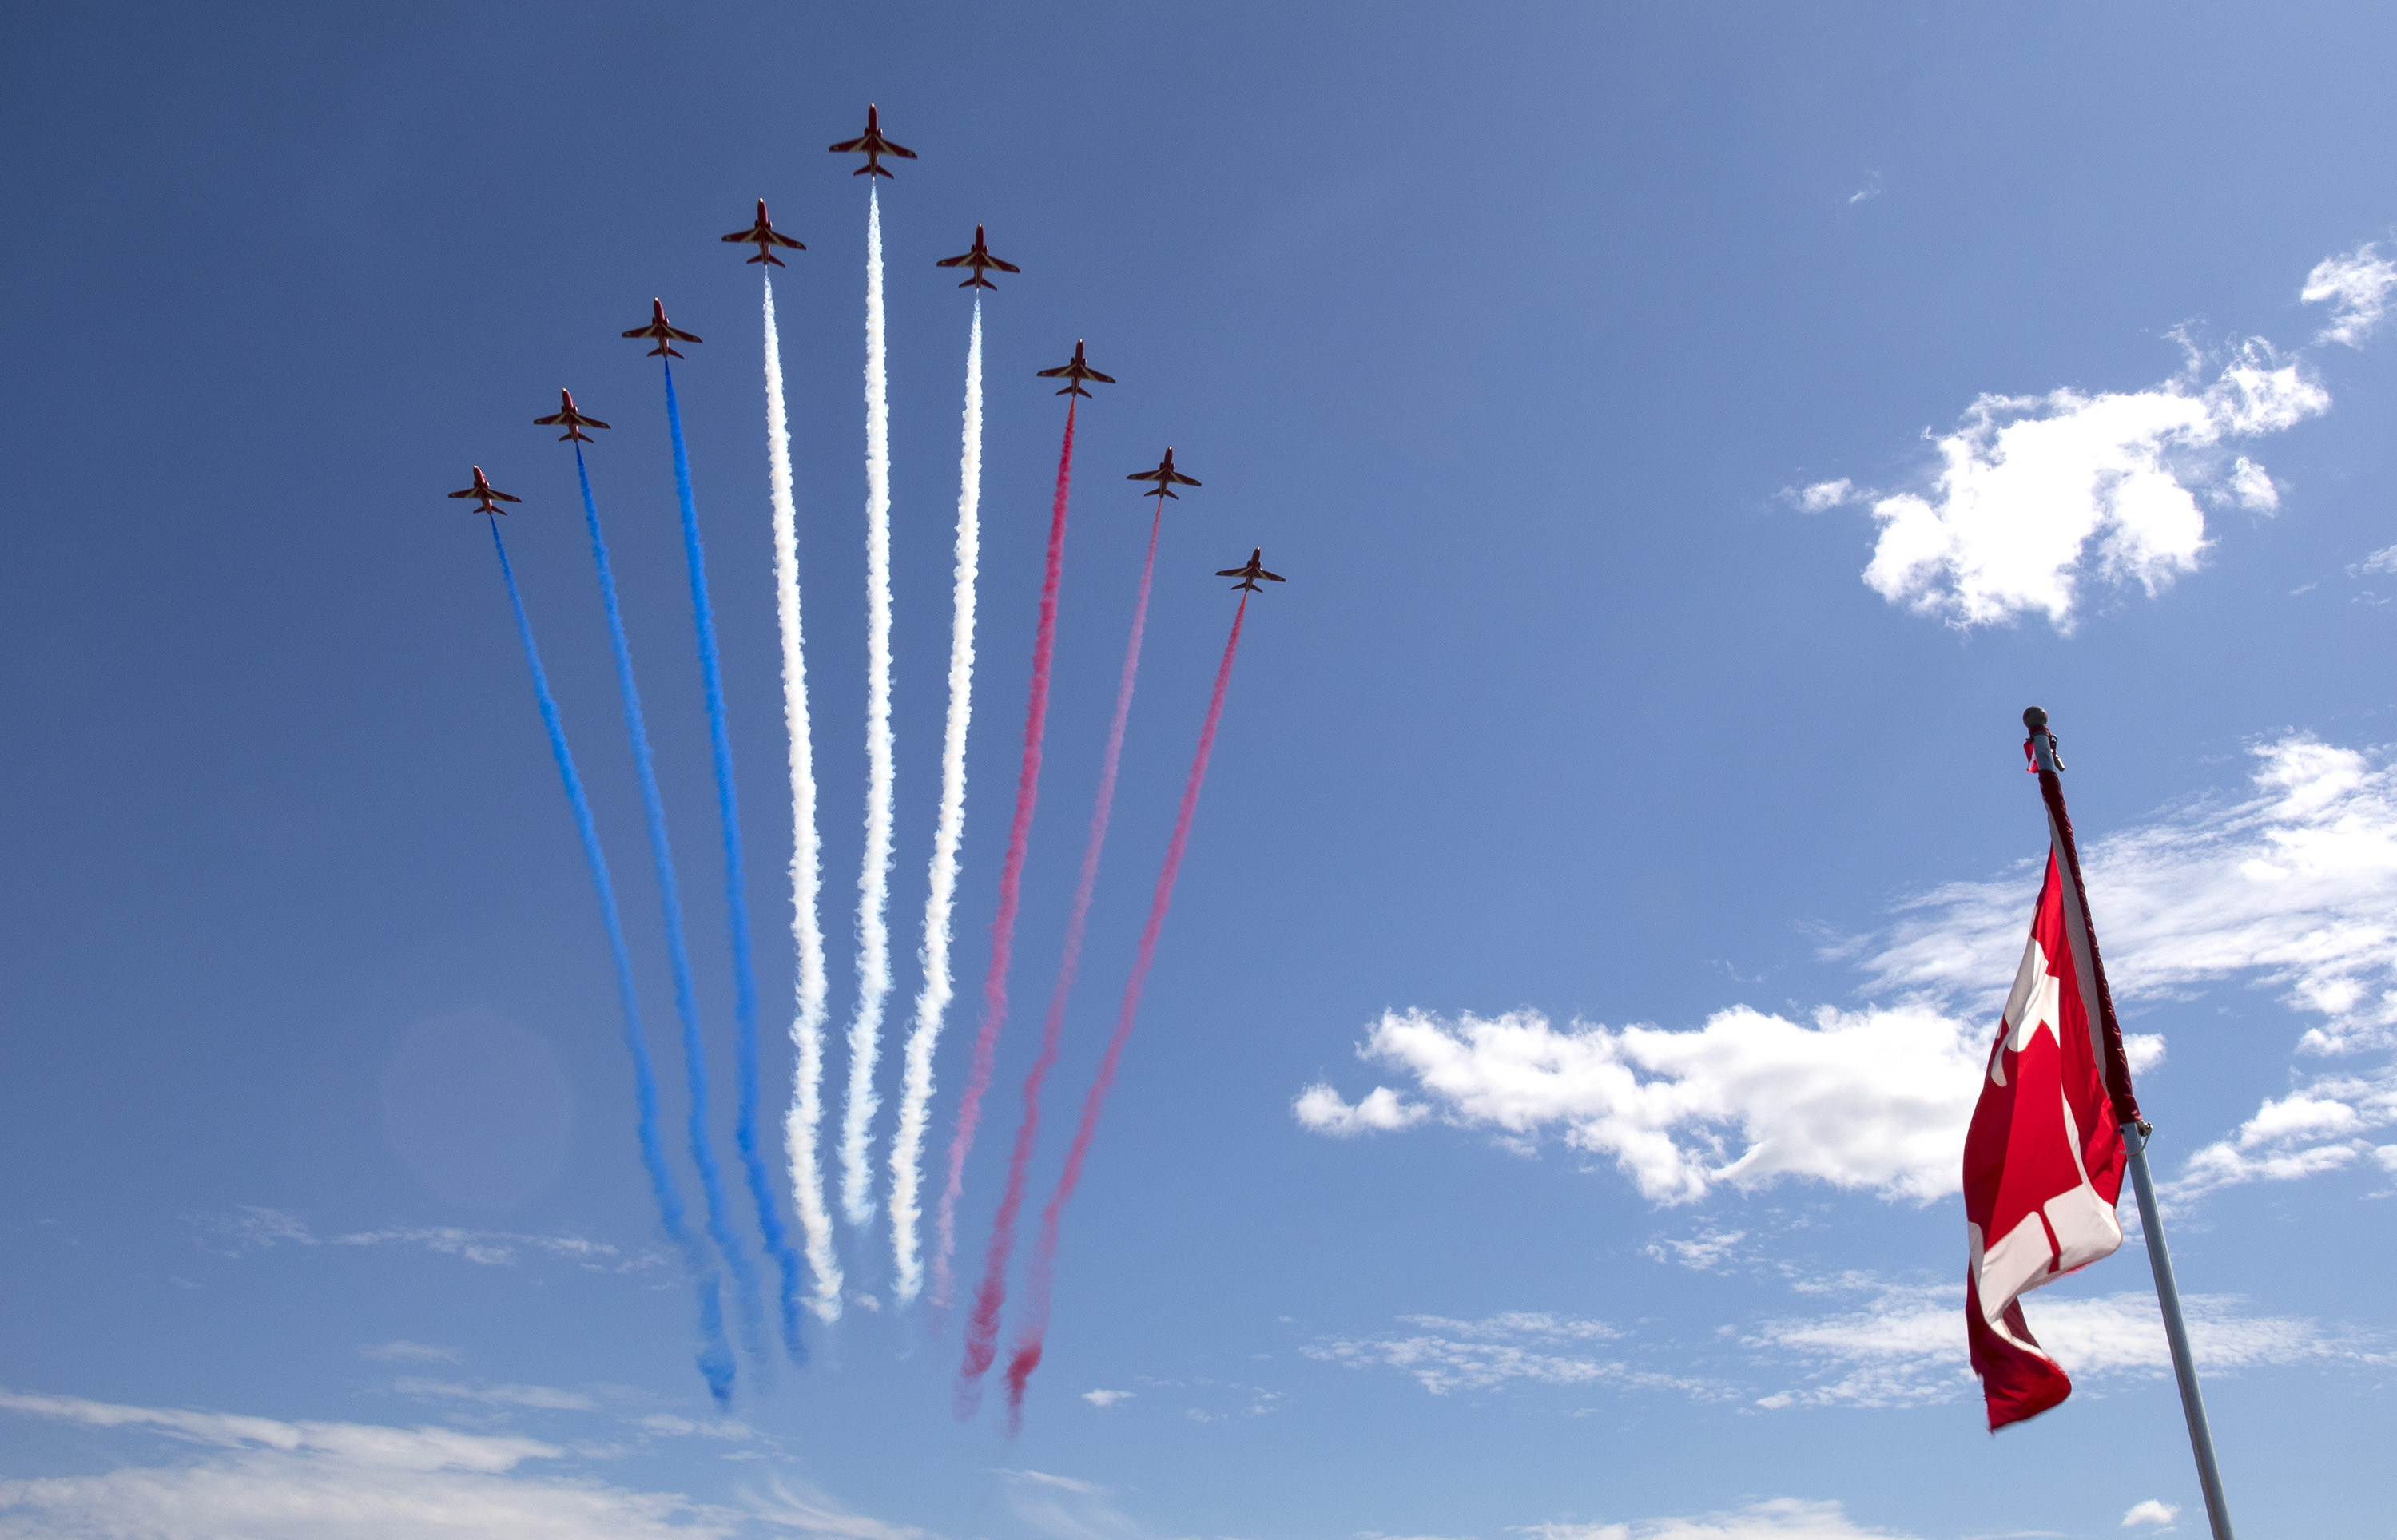 The Red Arrows will visit Canada to help mark the RCAF's centennial.